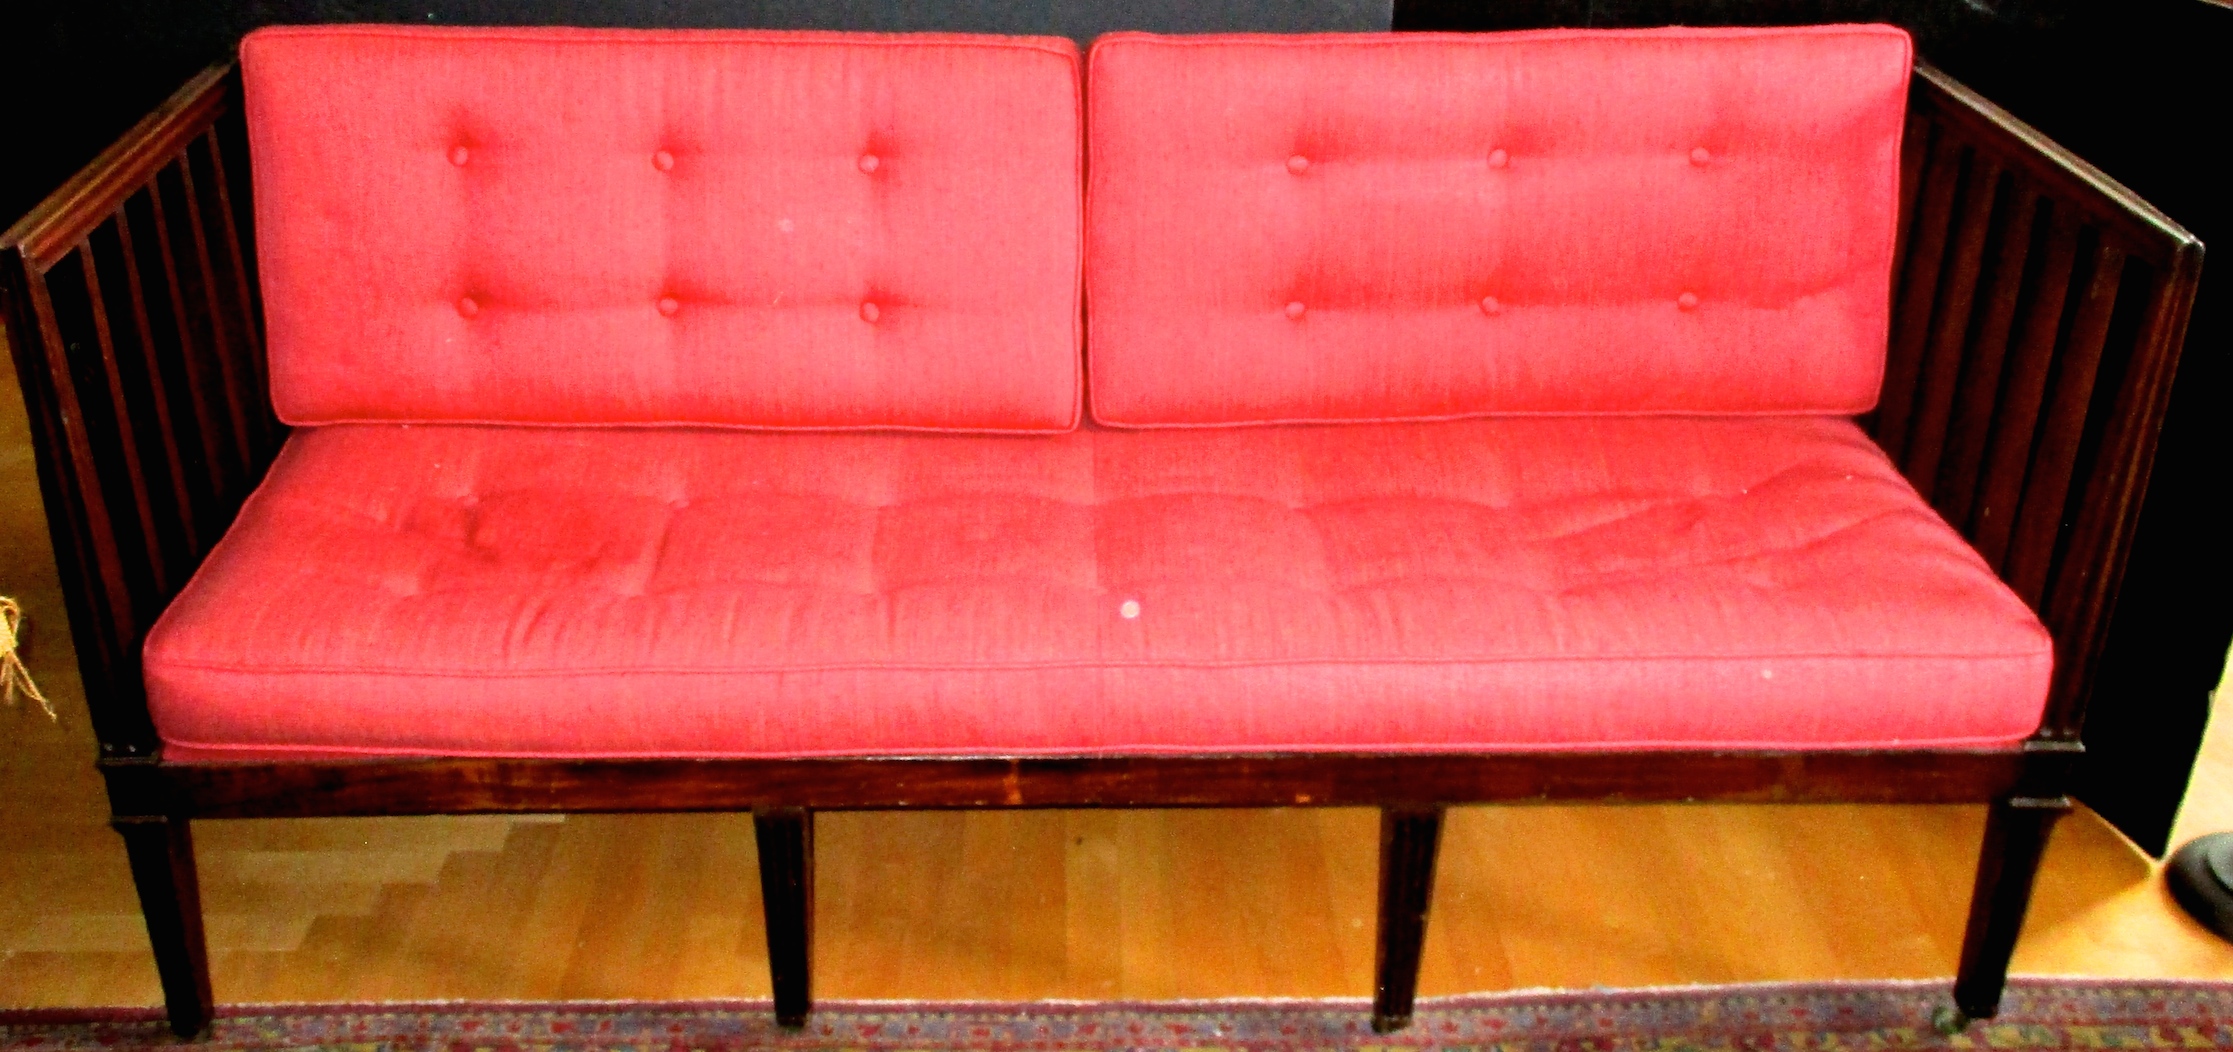 19th Century English Mahogany Settee (We can restore to customer's specifications)